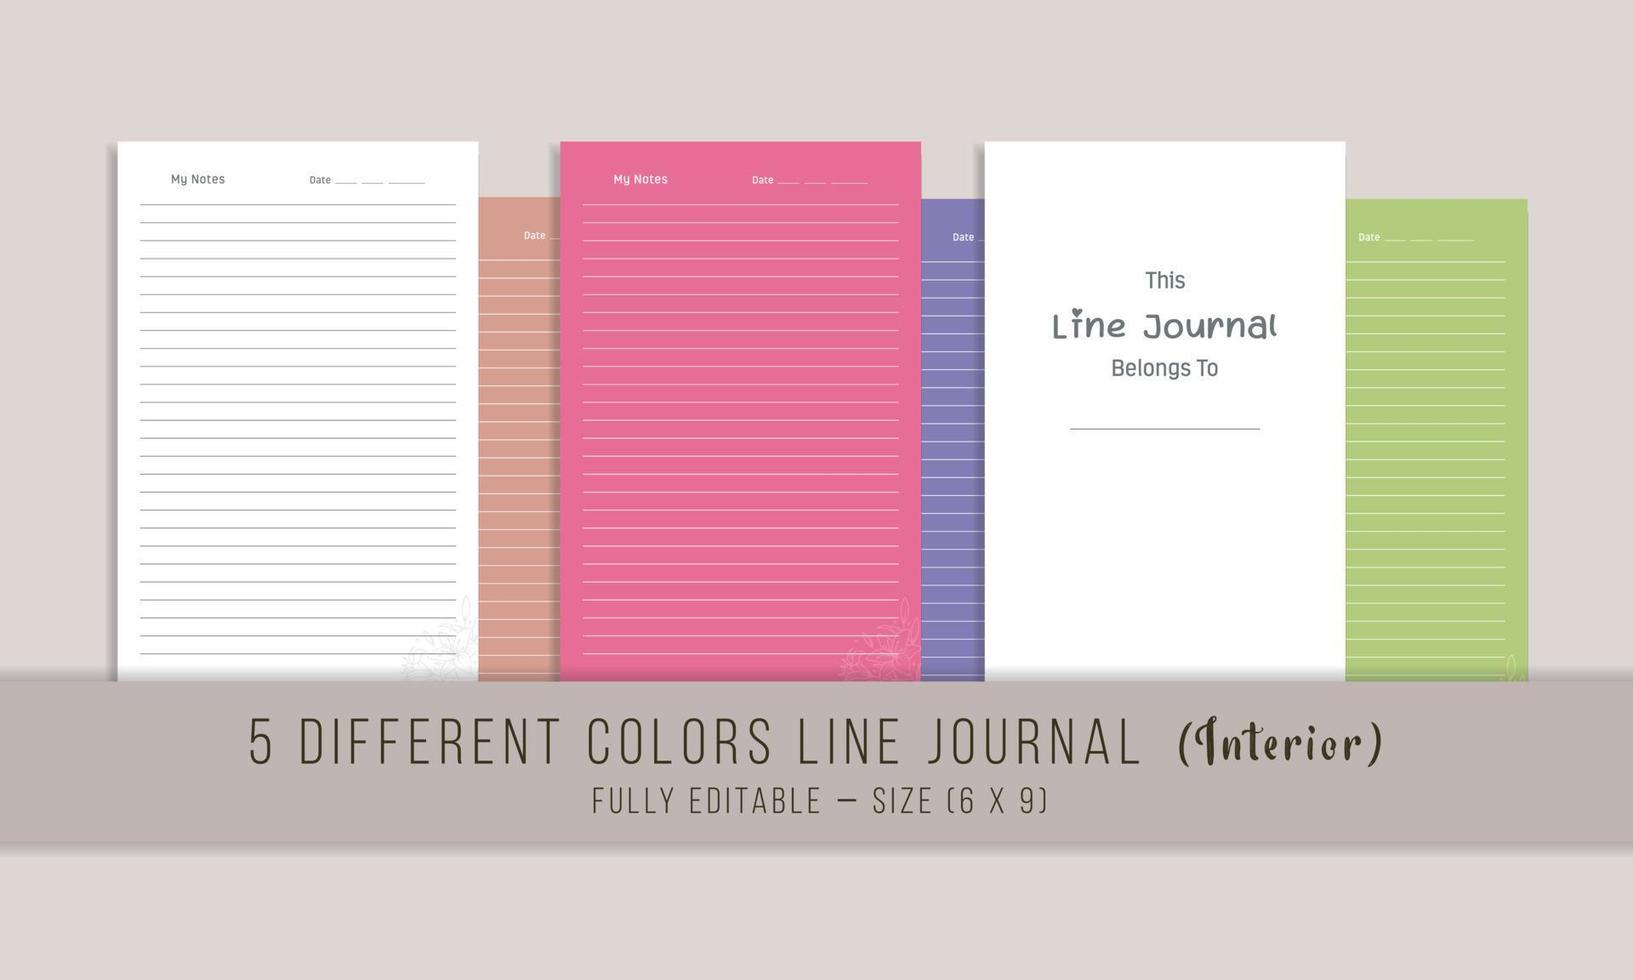 Lined Journal Interior Template Design vector